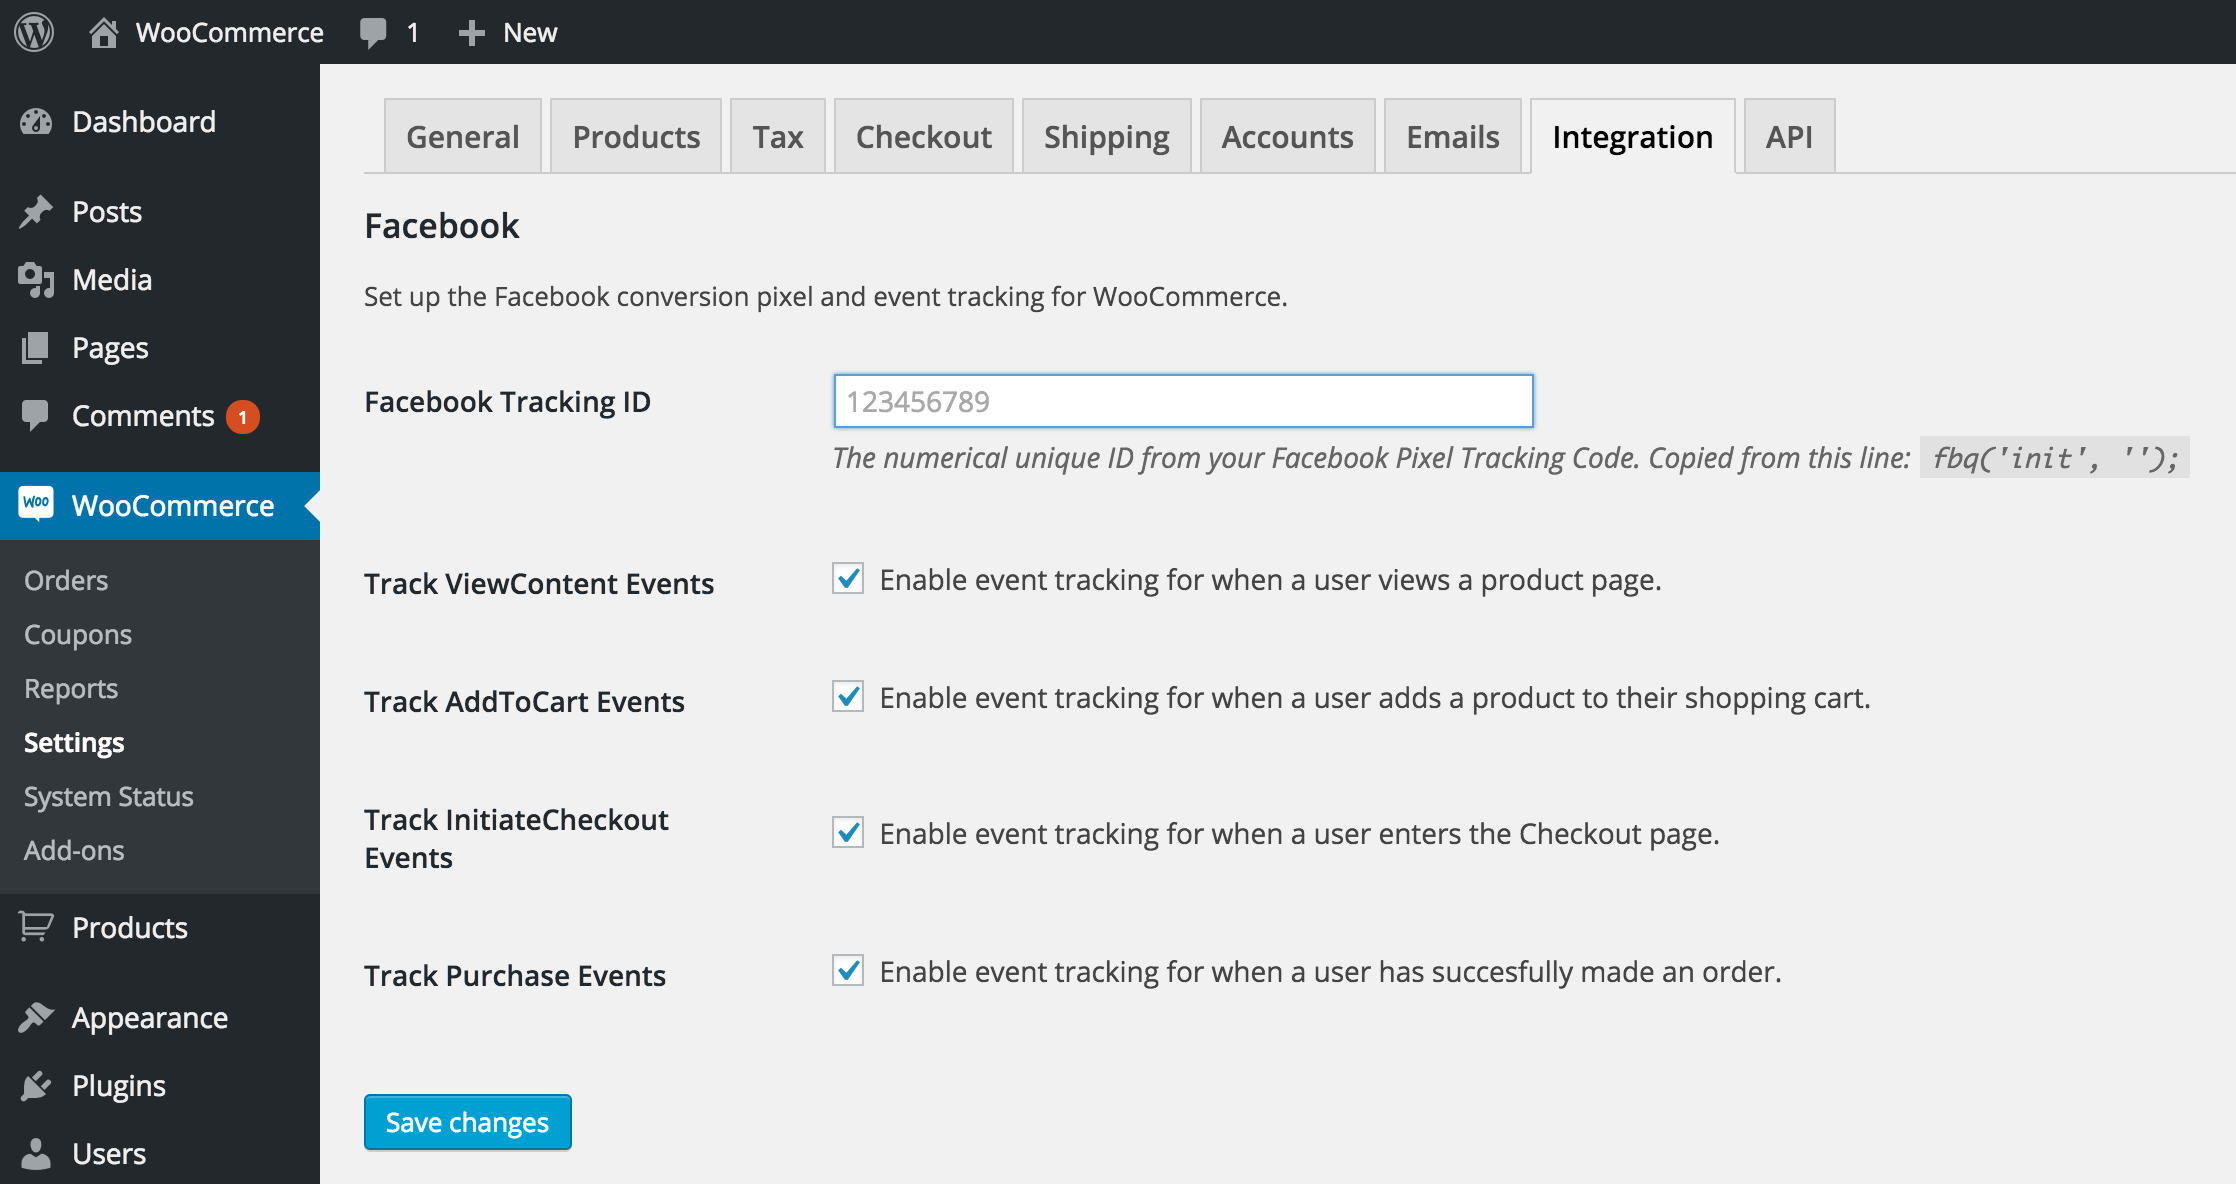 Integration settings page